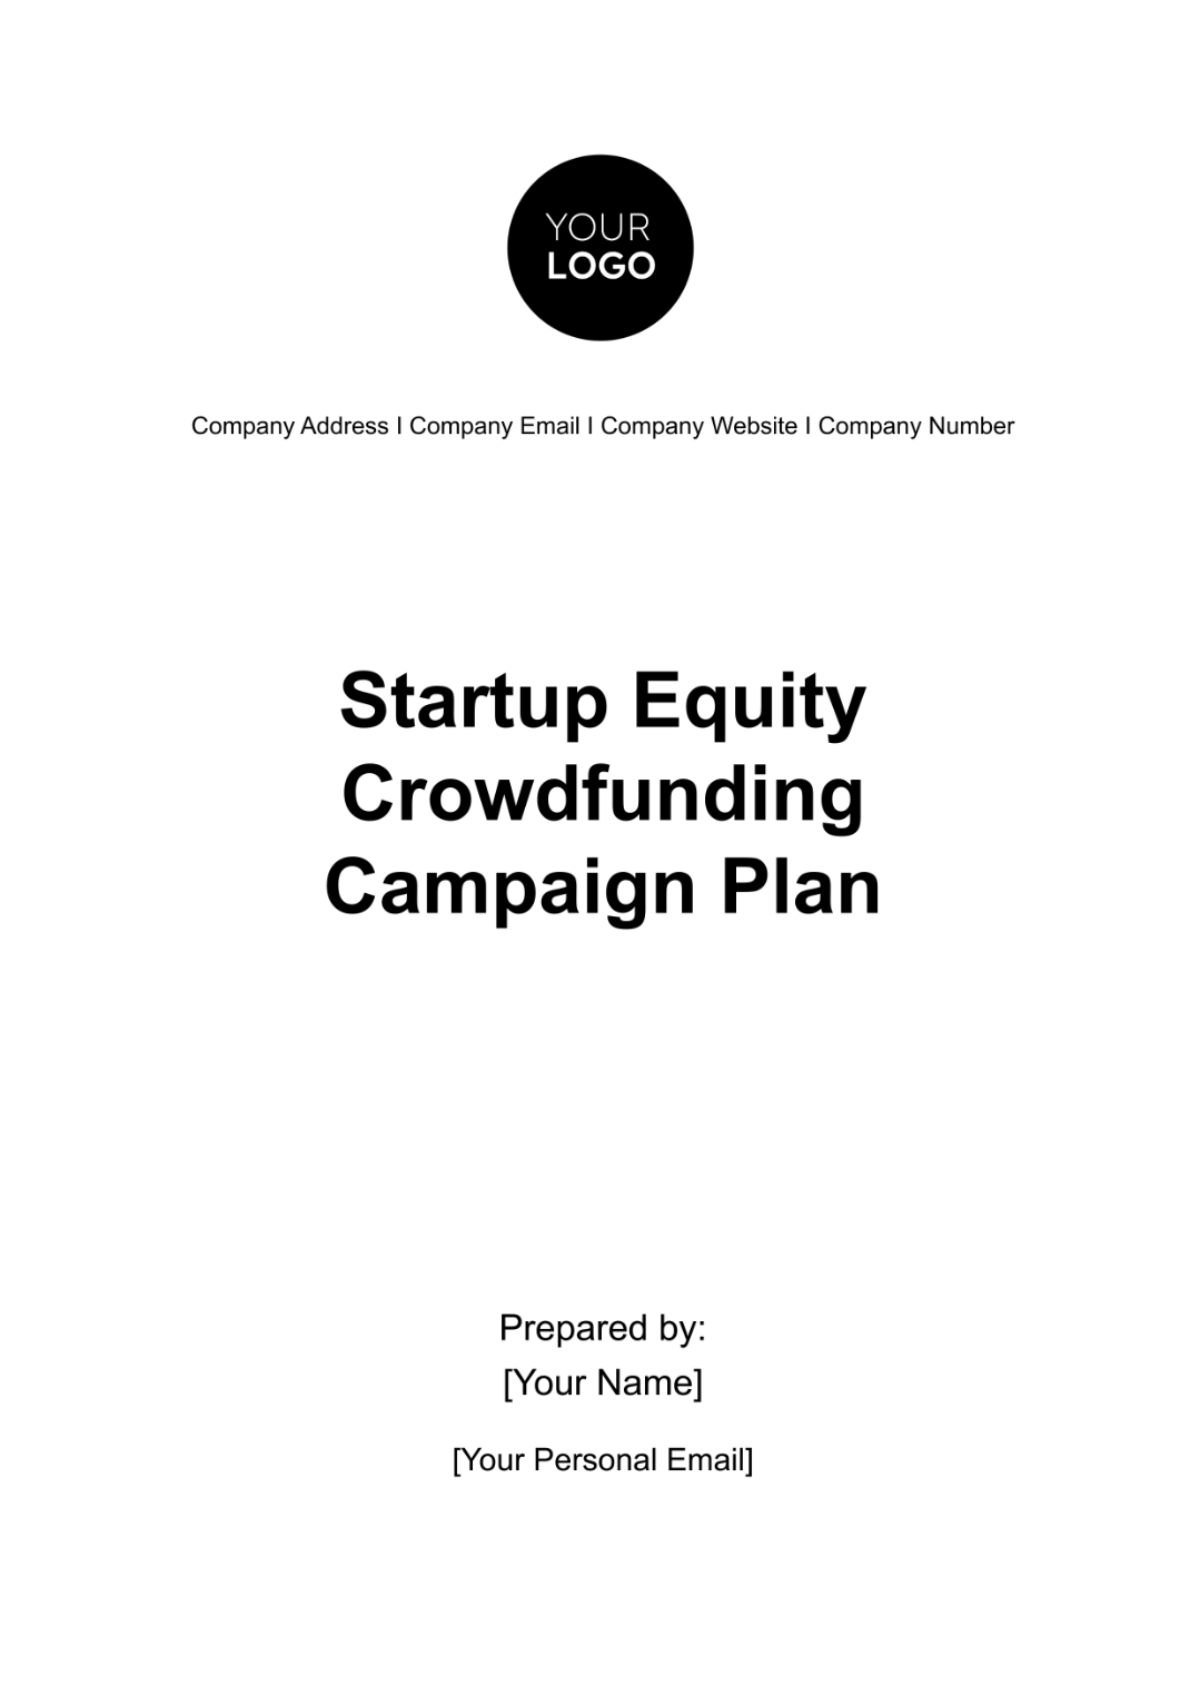 Startup Equity Crowdfunding Campaign Plan Template